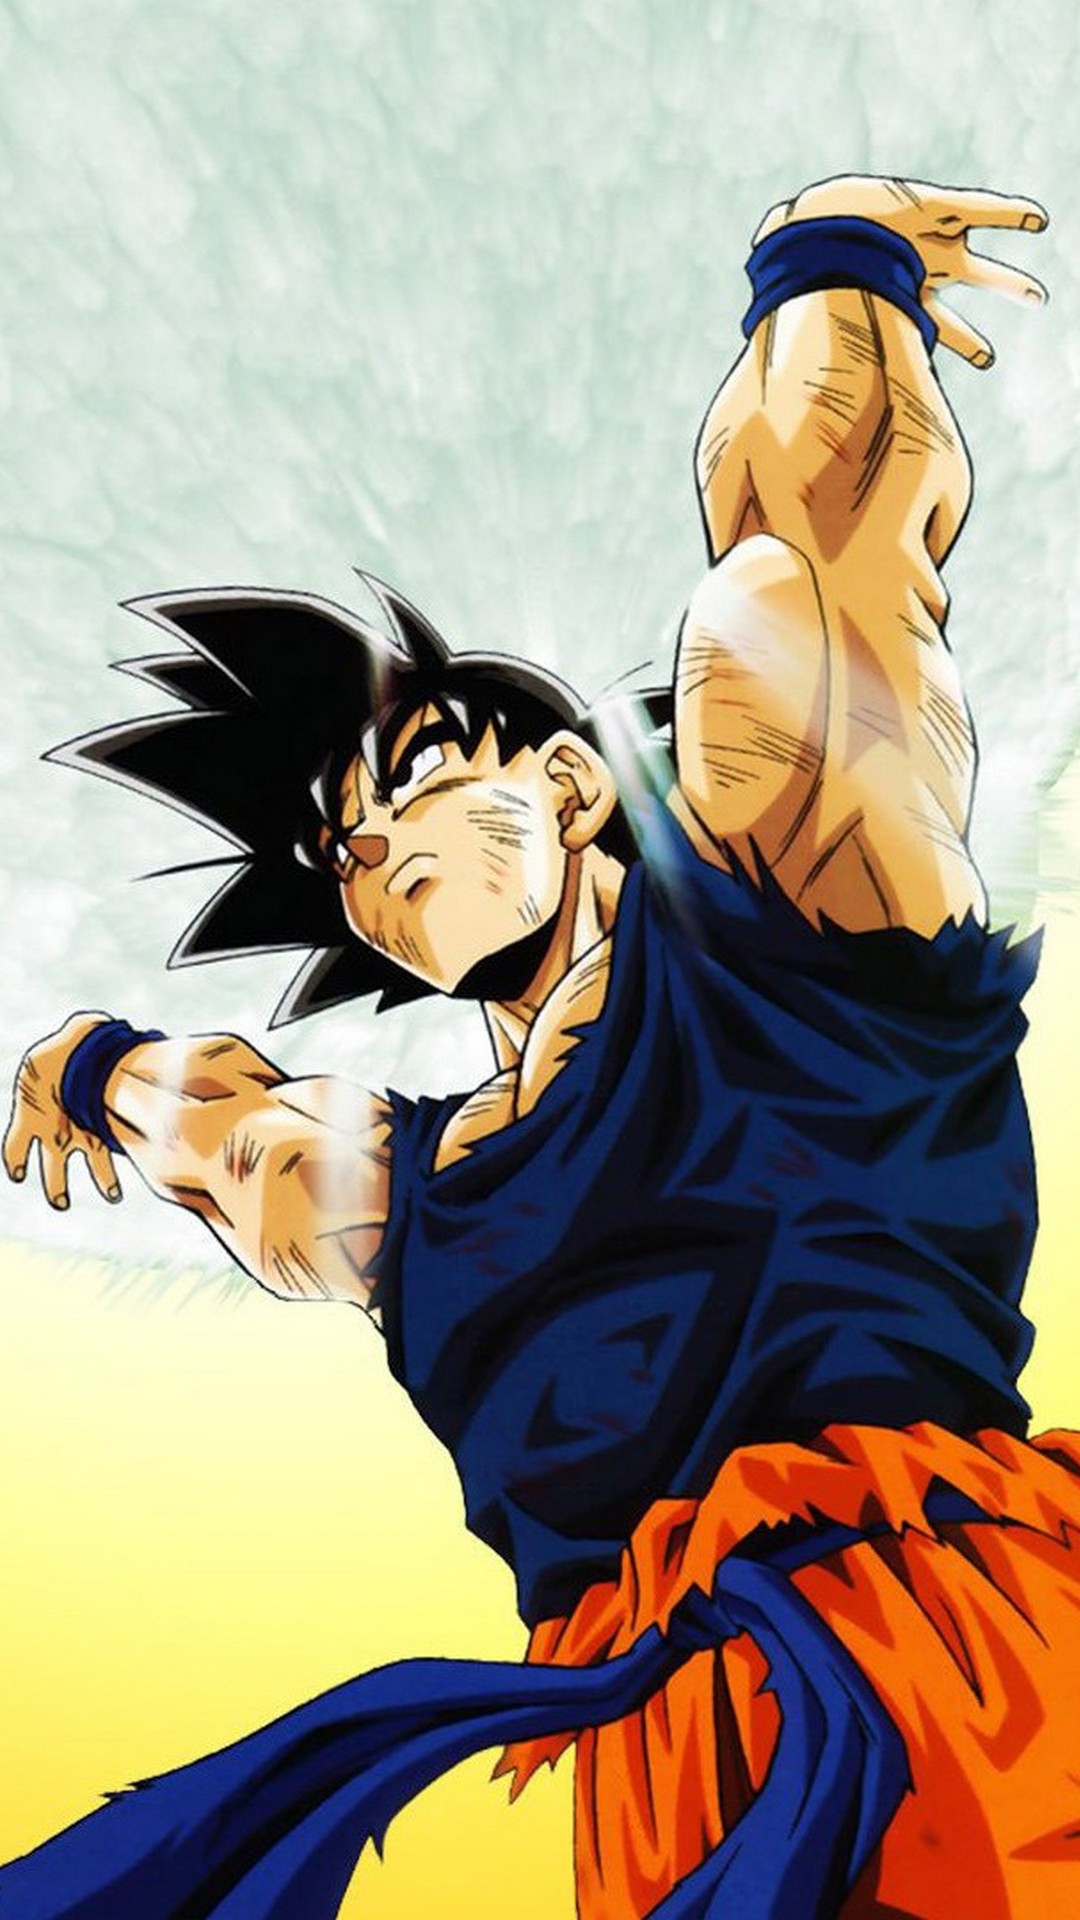 Goku Imagenes Wallpaper For iPhone with image resolution 1080x1920 pixel. You can make this wallpaper for your iPhone 5, 6, 7, 8, X backgrounds, Mobile Screensaver, or iPad Lock Screen